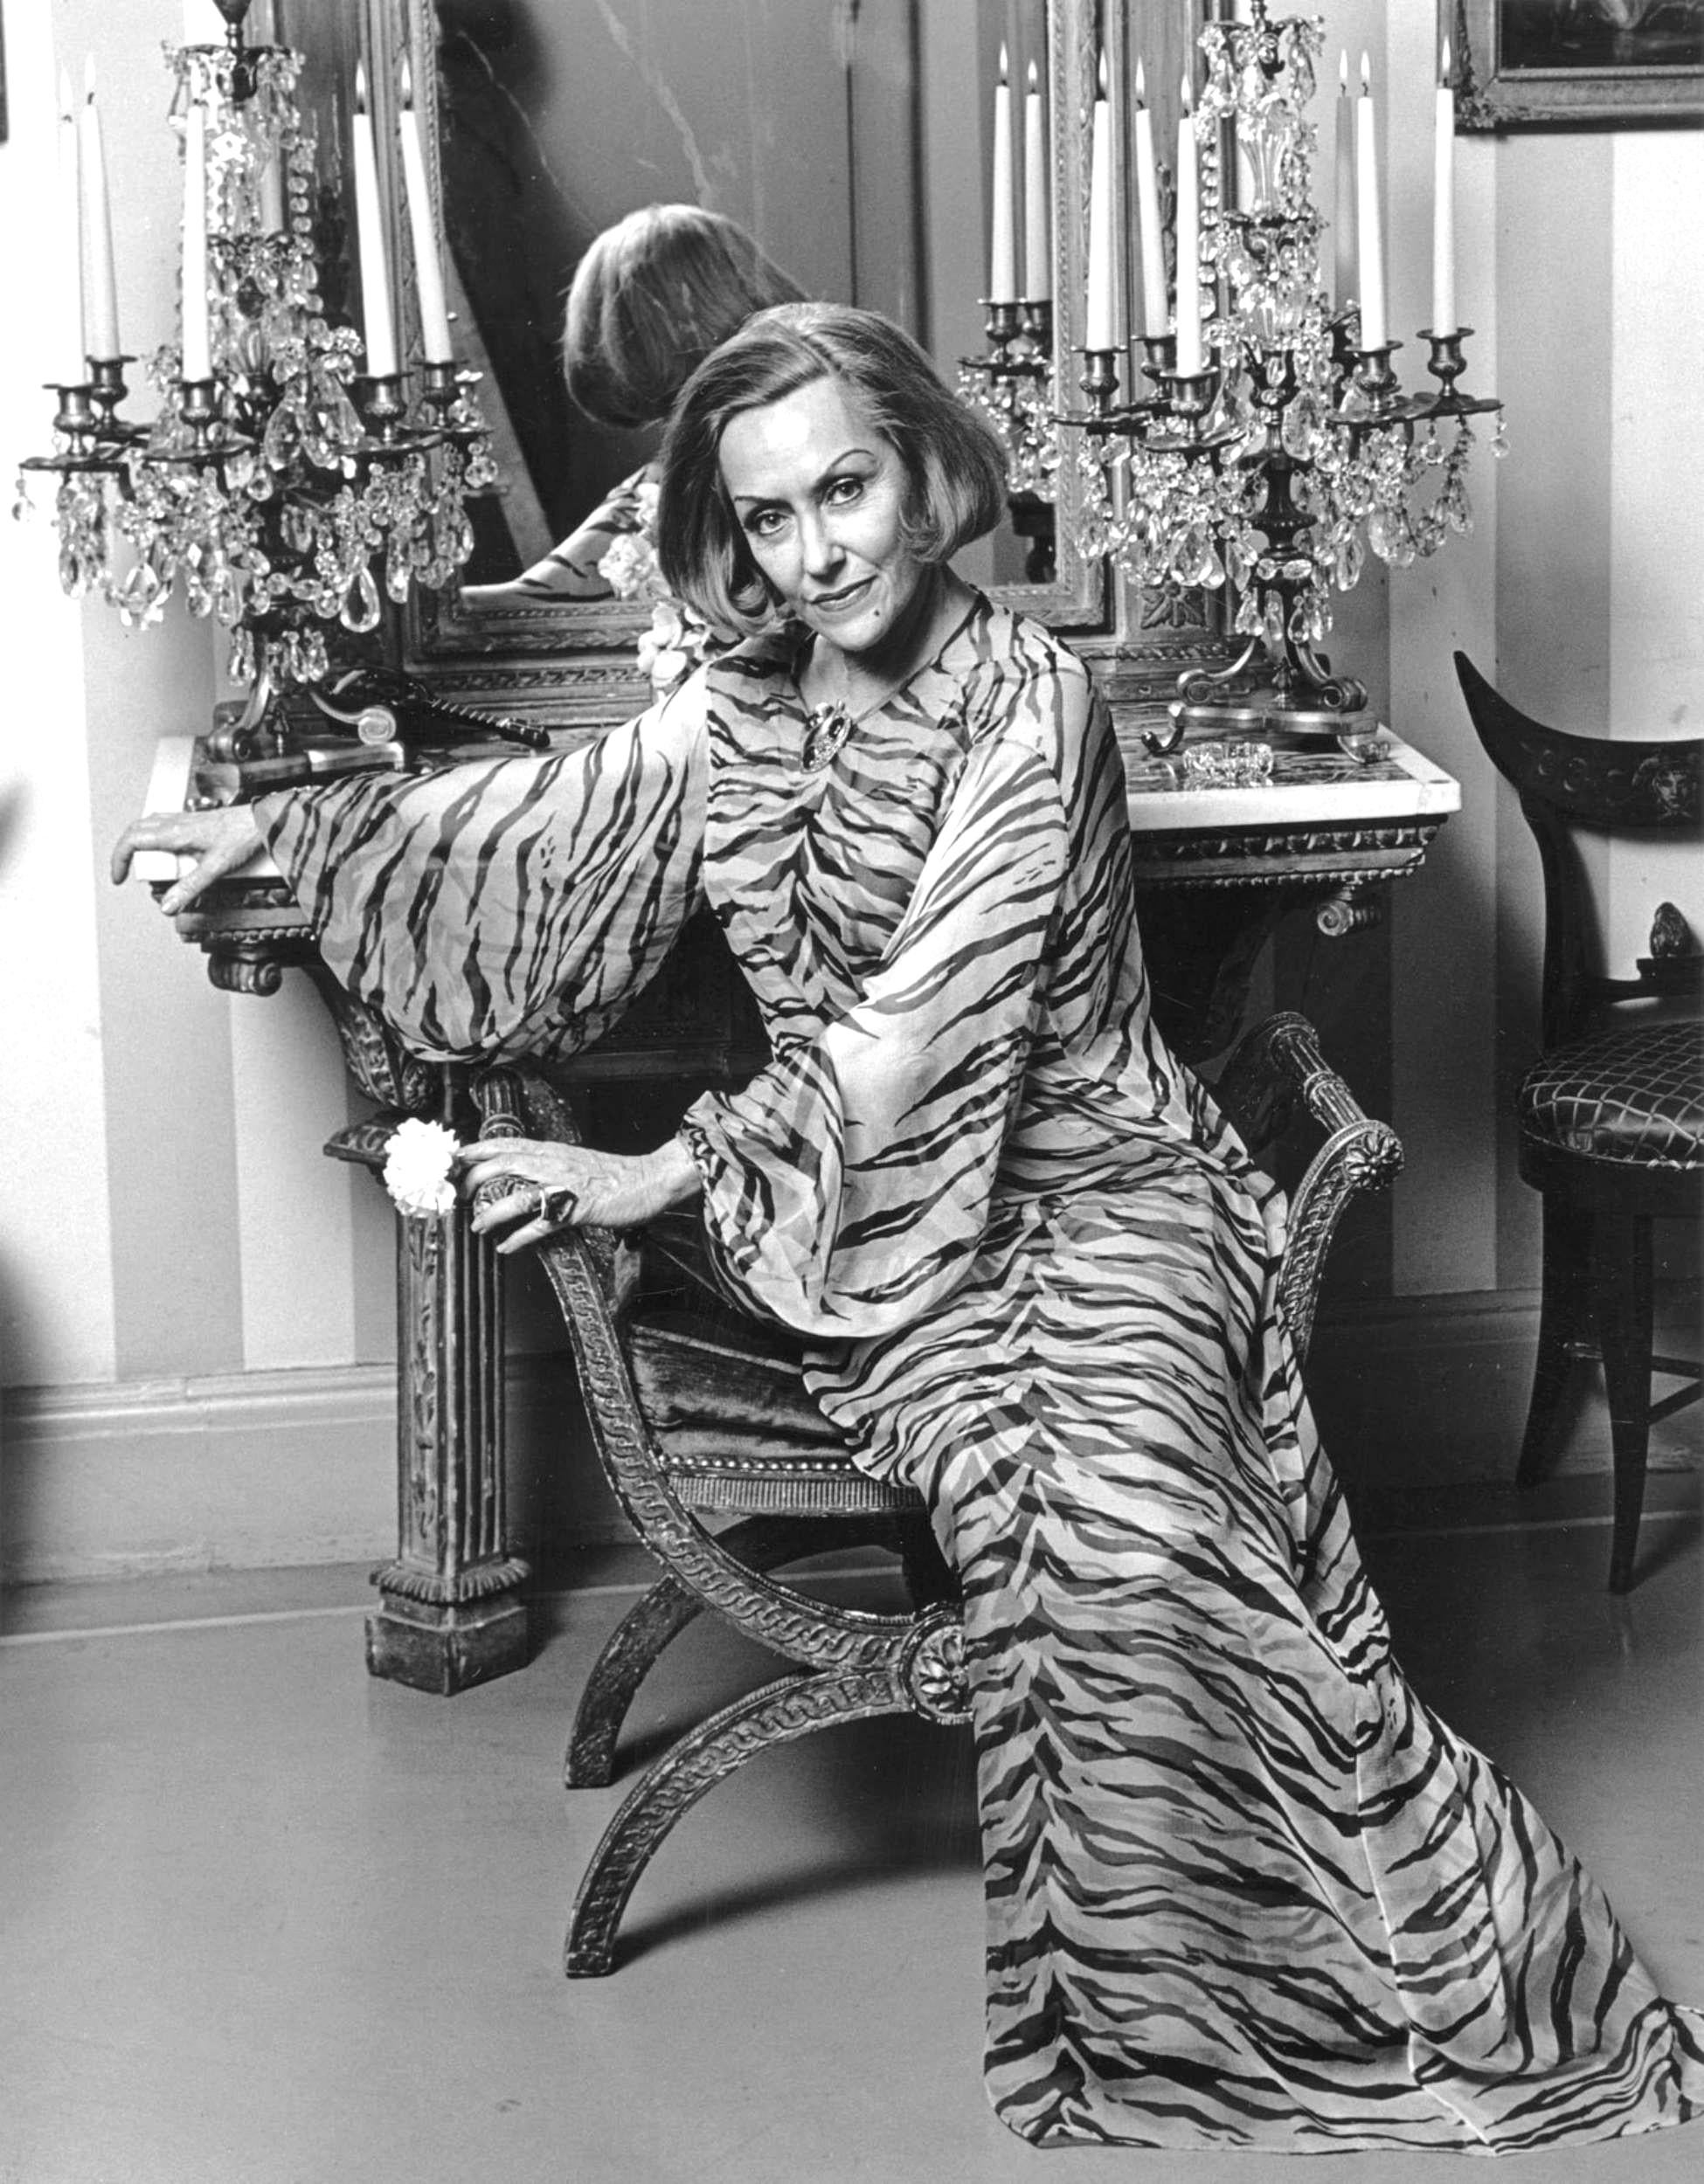 Jack Mitchell Portrait Photograph - Iconic 'Sunset Boulevard' Hollywood Film Star Gloria Swanson at home in NYC